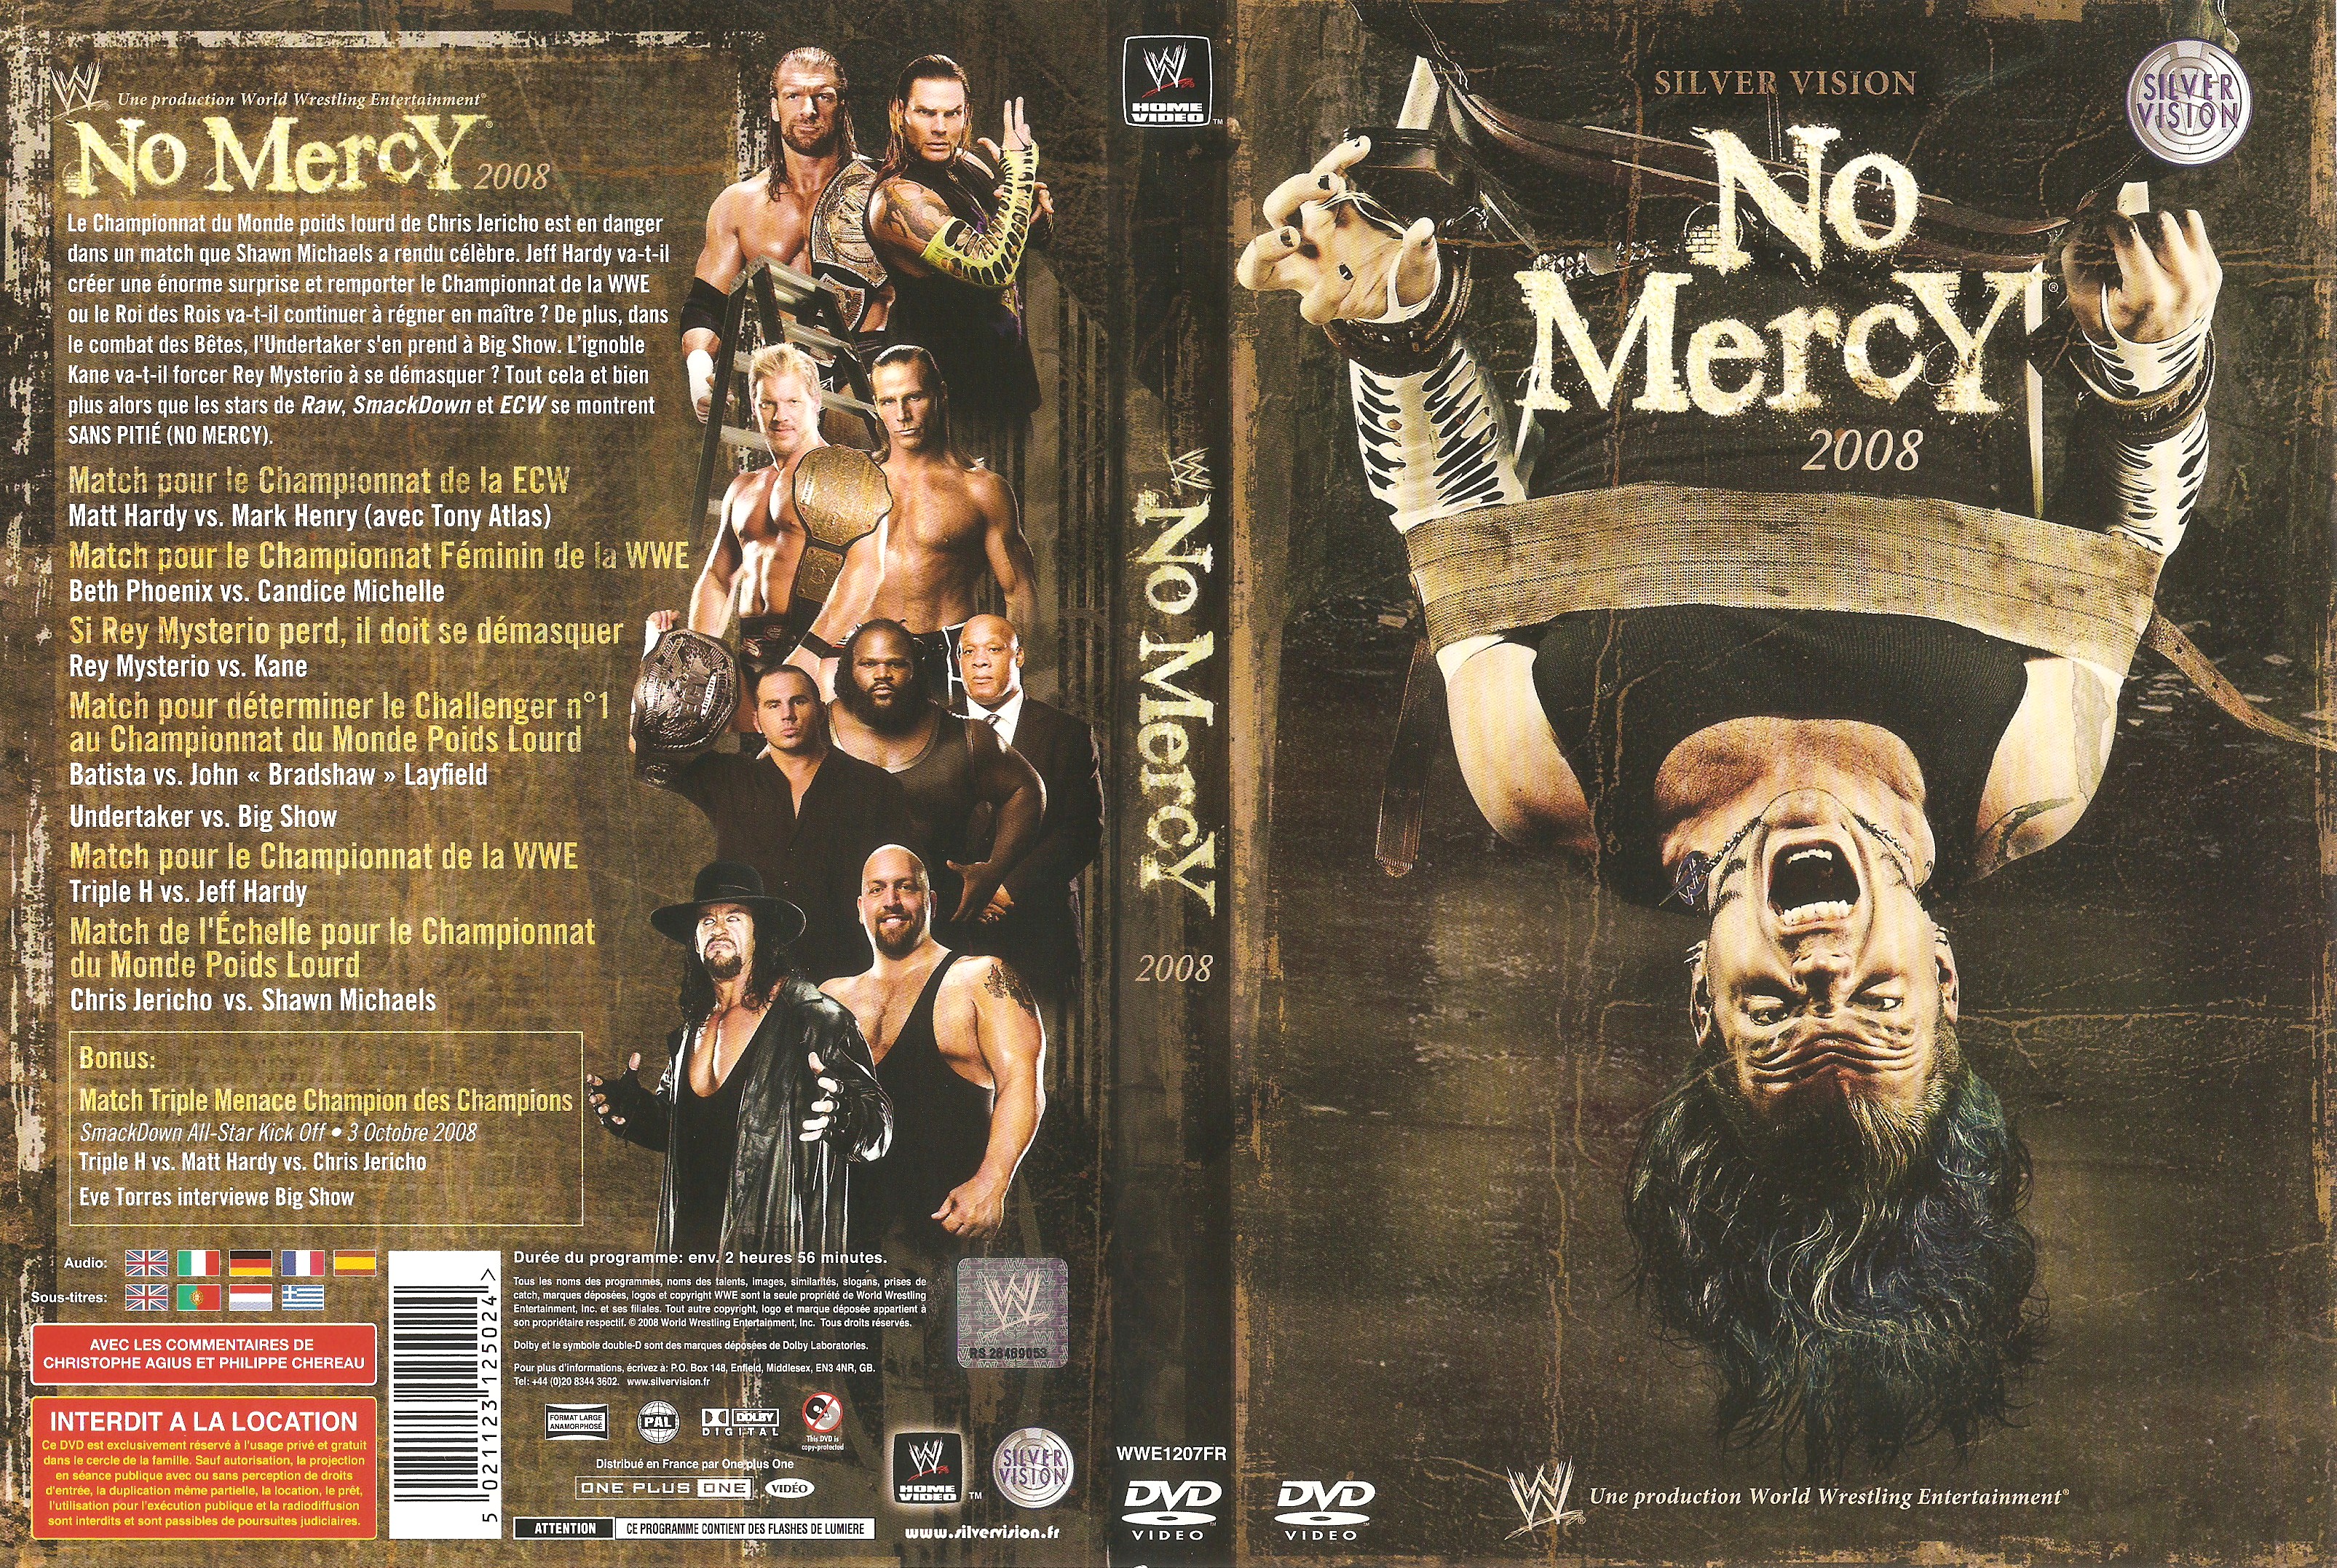 Jaquette DVD WWE No Mercy 2008